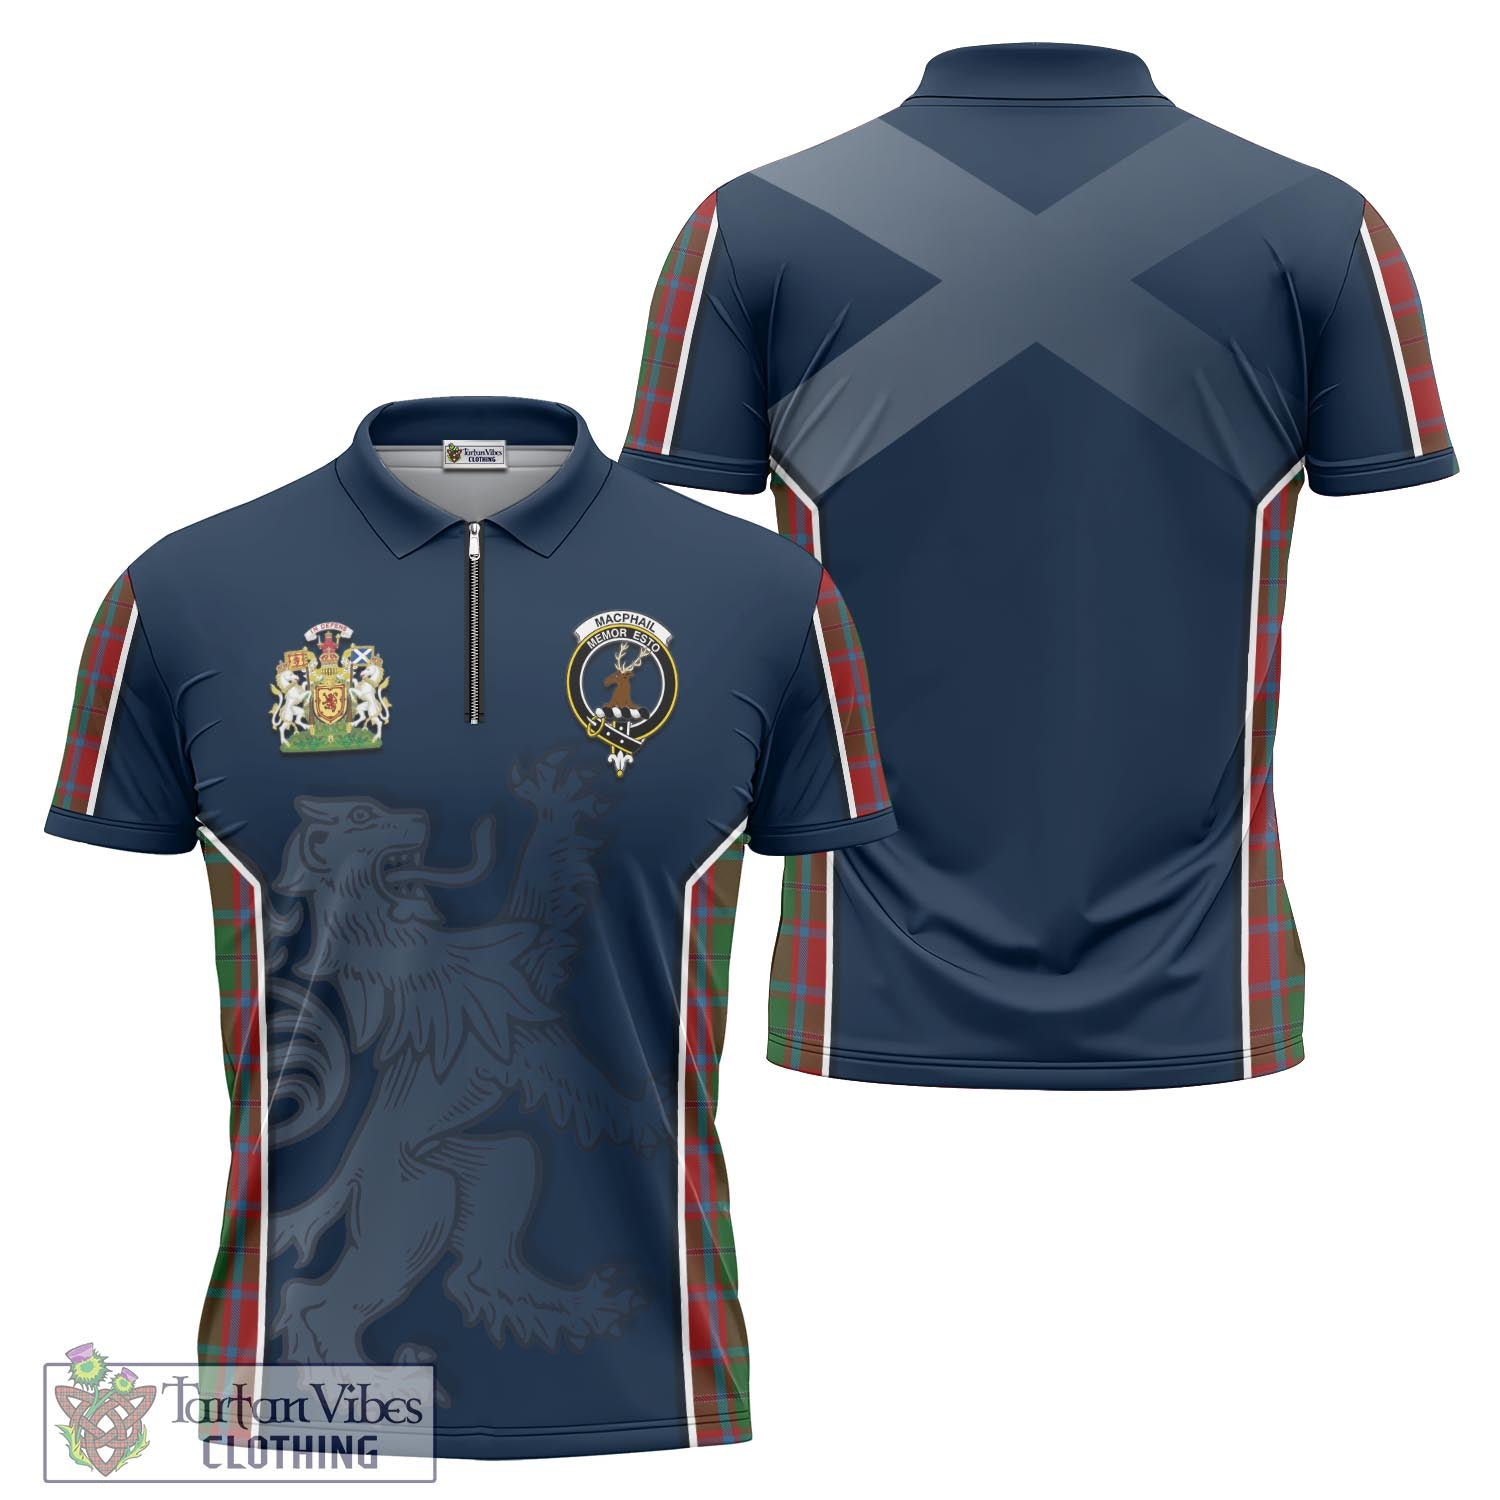 Tartan Vibes Clothing MacPhail Blue Bands Tartan Zipper Polo Shirt with Family Crest and Lion Rampant Vibes Sport Style